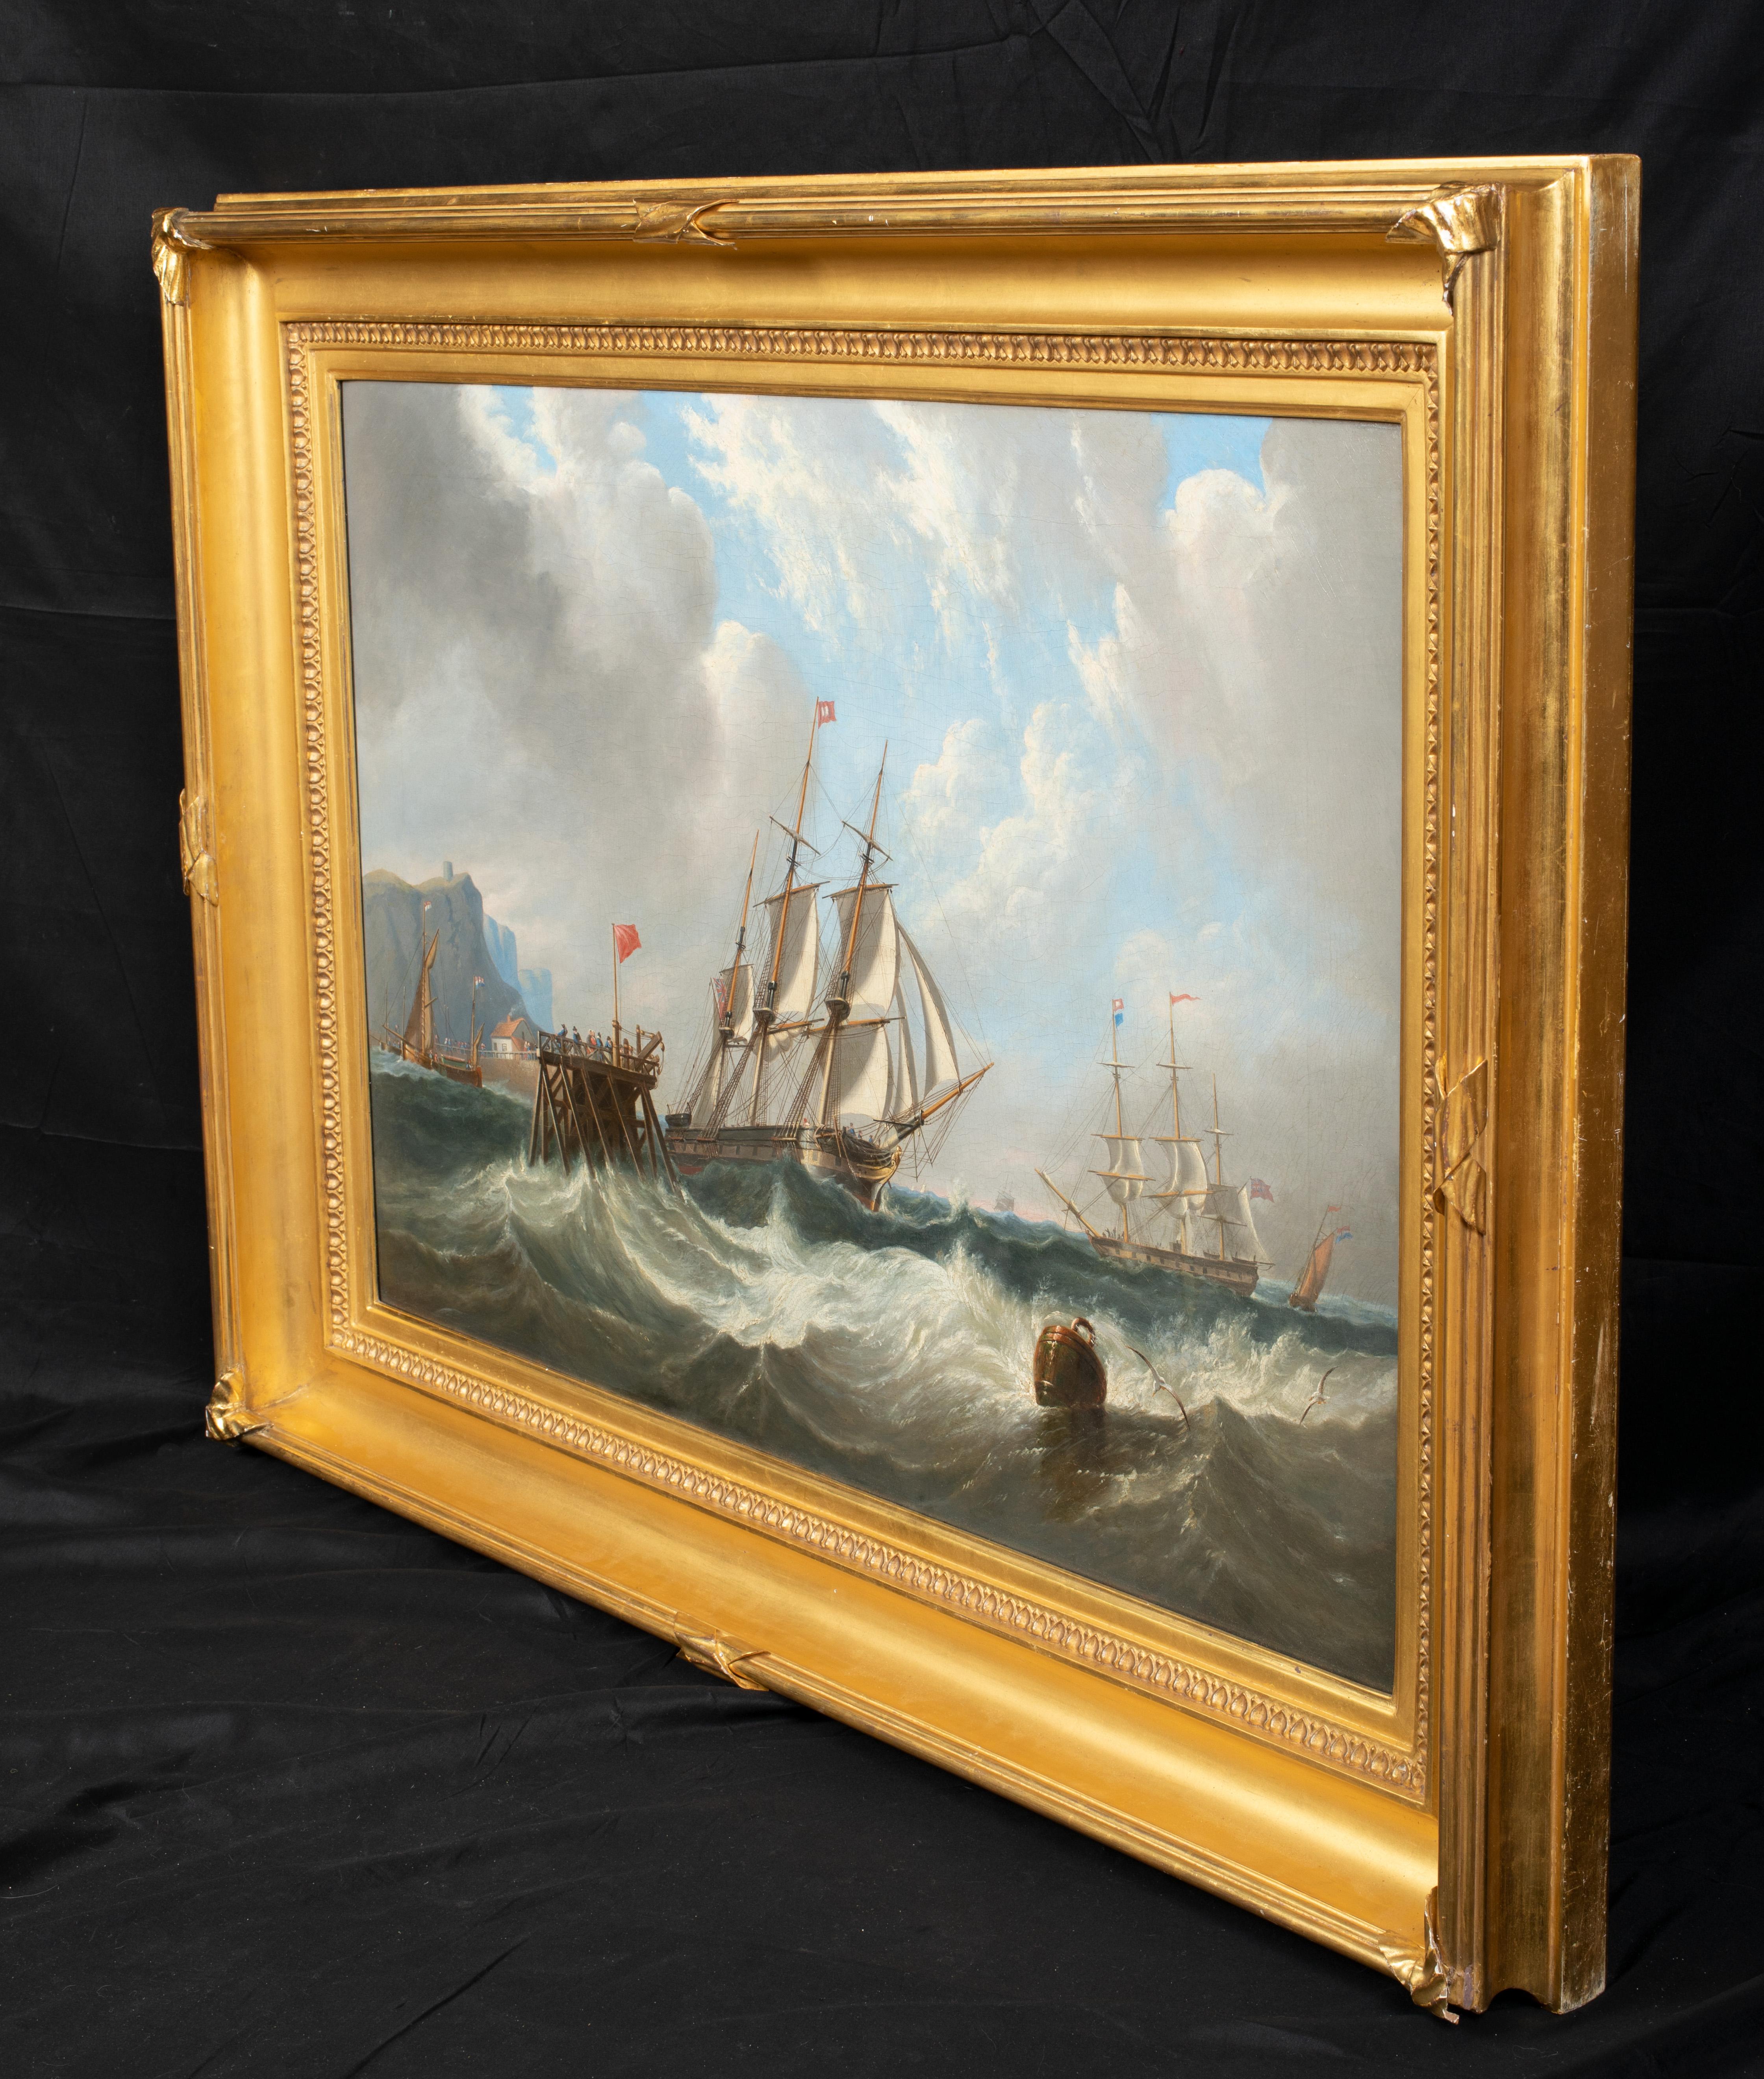 Ship In A Swell Off The Pier, 19th Century

attributed to Henry Redmore (1820-1888)

Fine Large 19th century British maritime scene of a ship in a swell off the coast by a pier, oil on canvas attributed to Henry Redmore. Excellent quality and